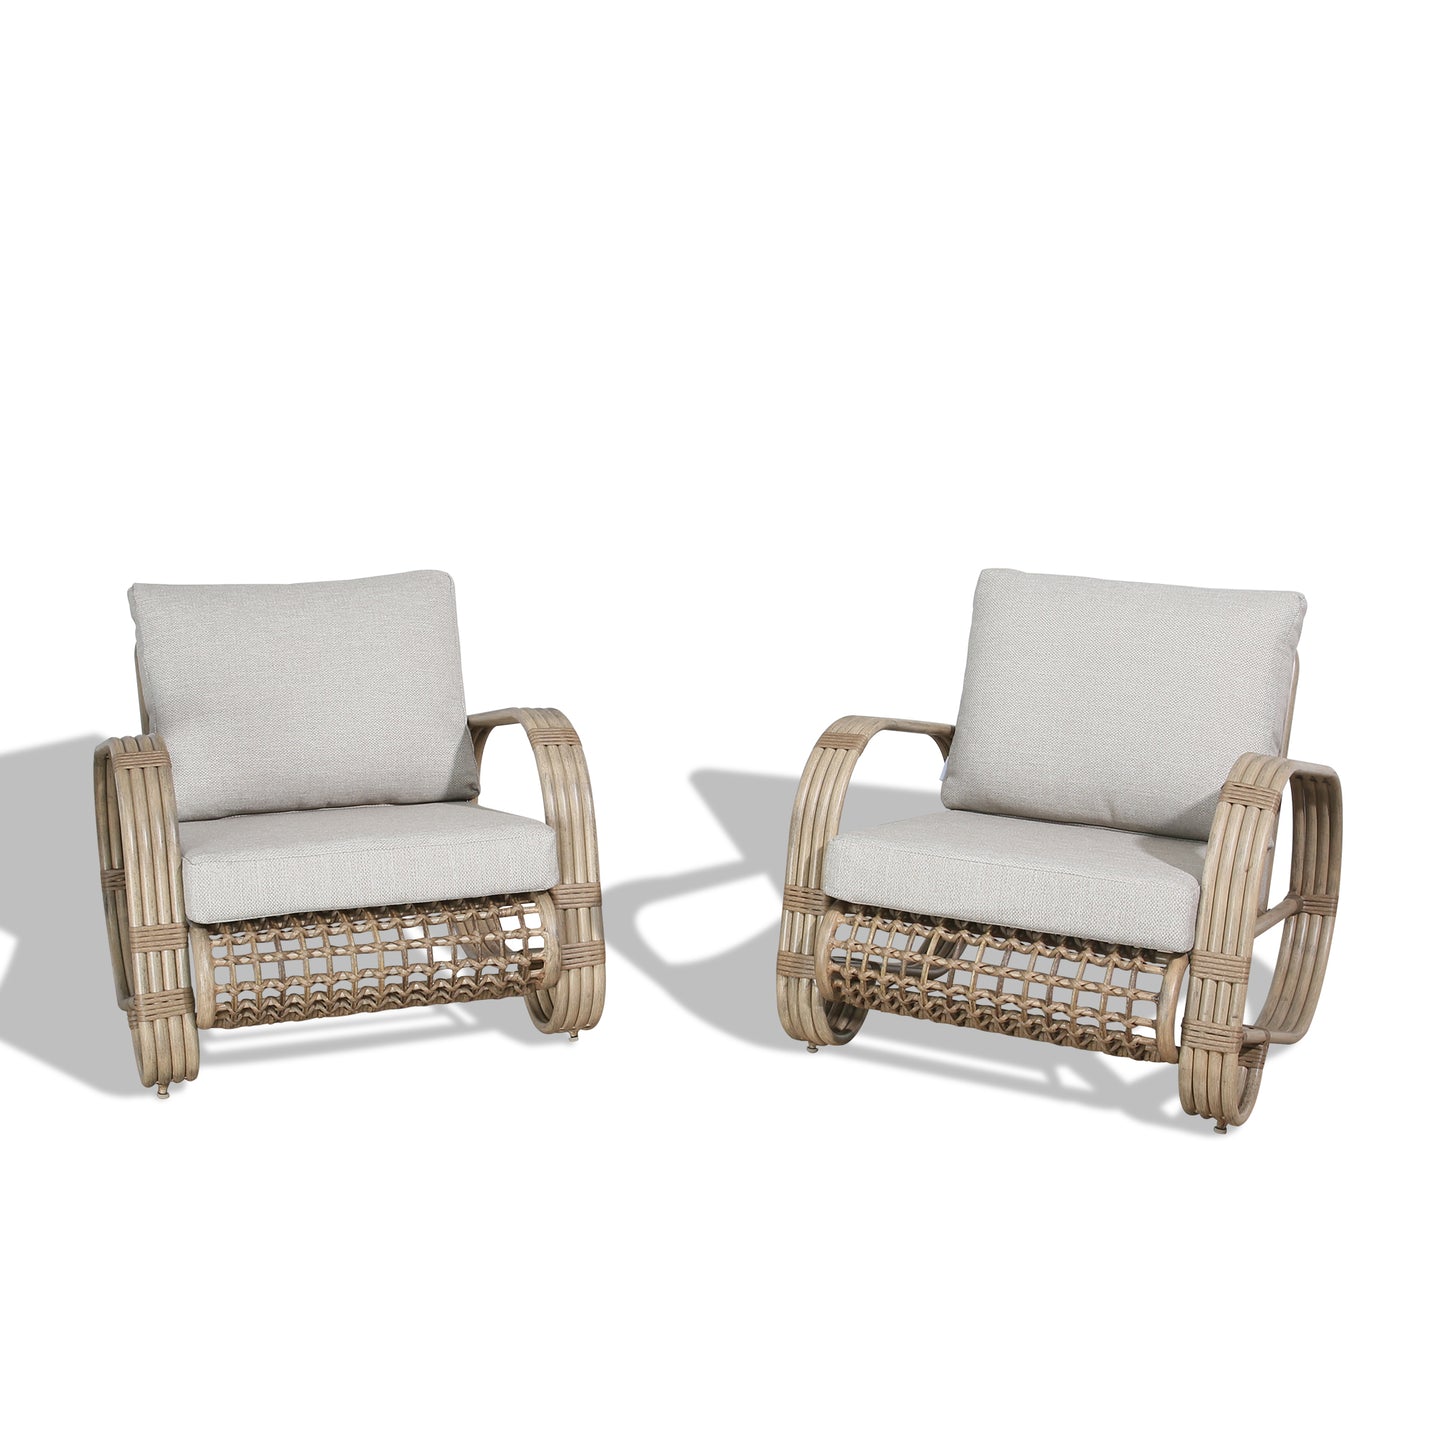 Patio Hand-Brush Aluminum Club Chairs Set of 2 Outdoor Luxury Wicker Armchairs with Olefin Cushions